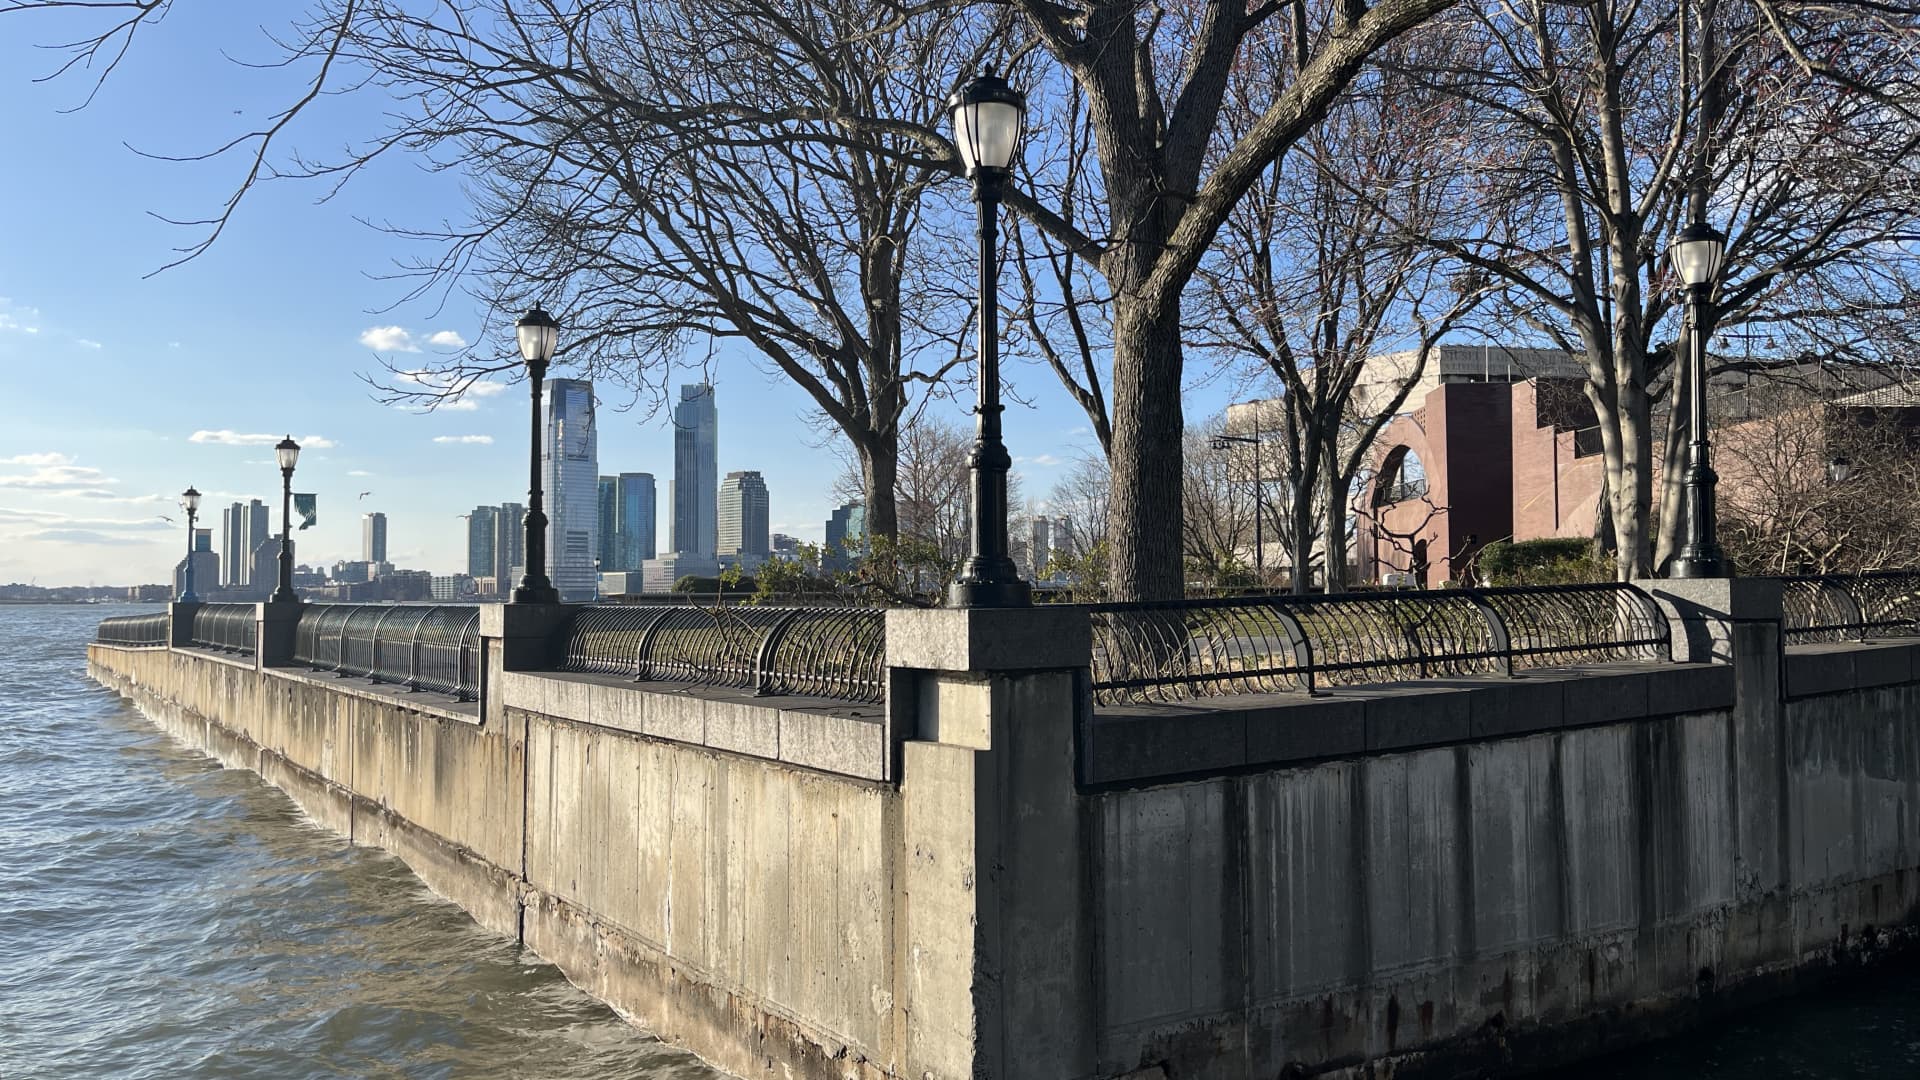 Wagner Park will soon be demolished and built ten feet higher as part of the Battery Park City Resiliency Project.